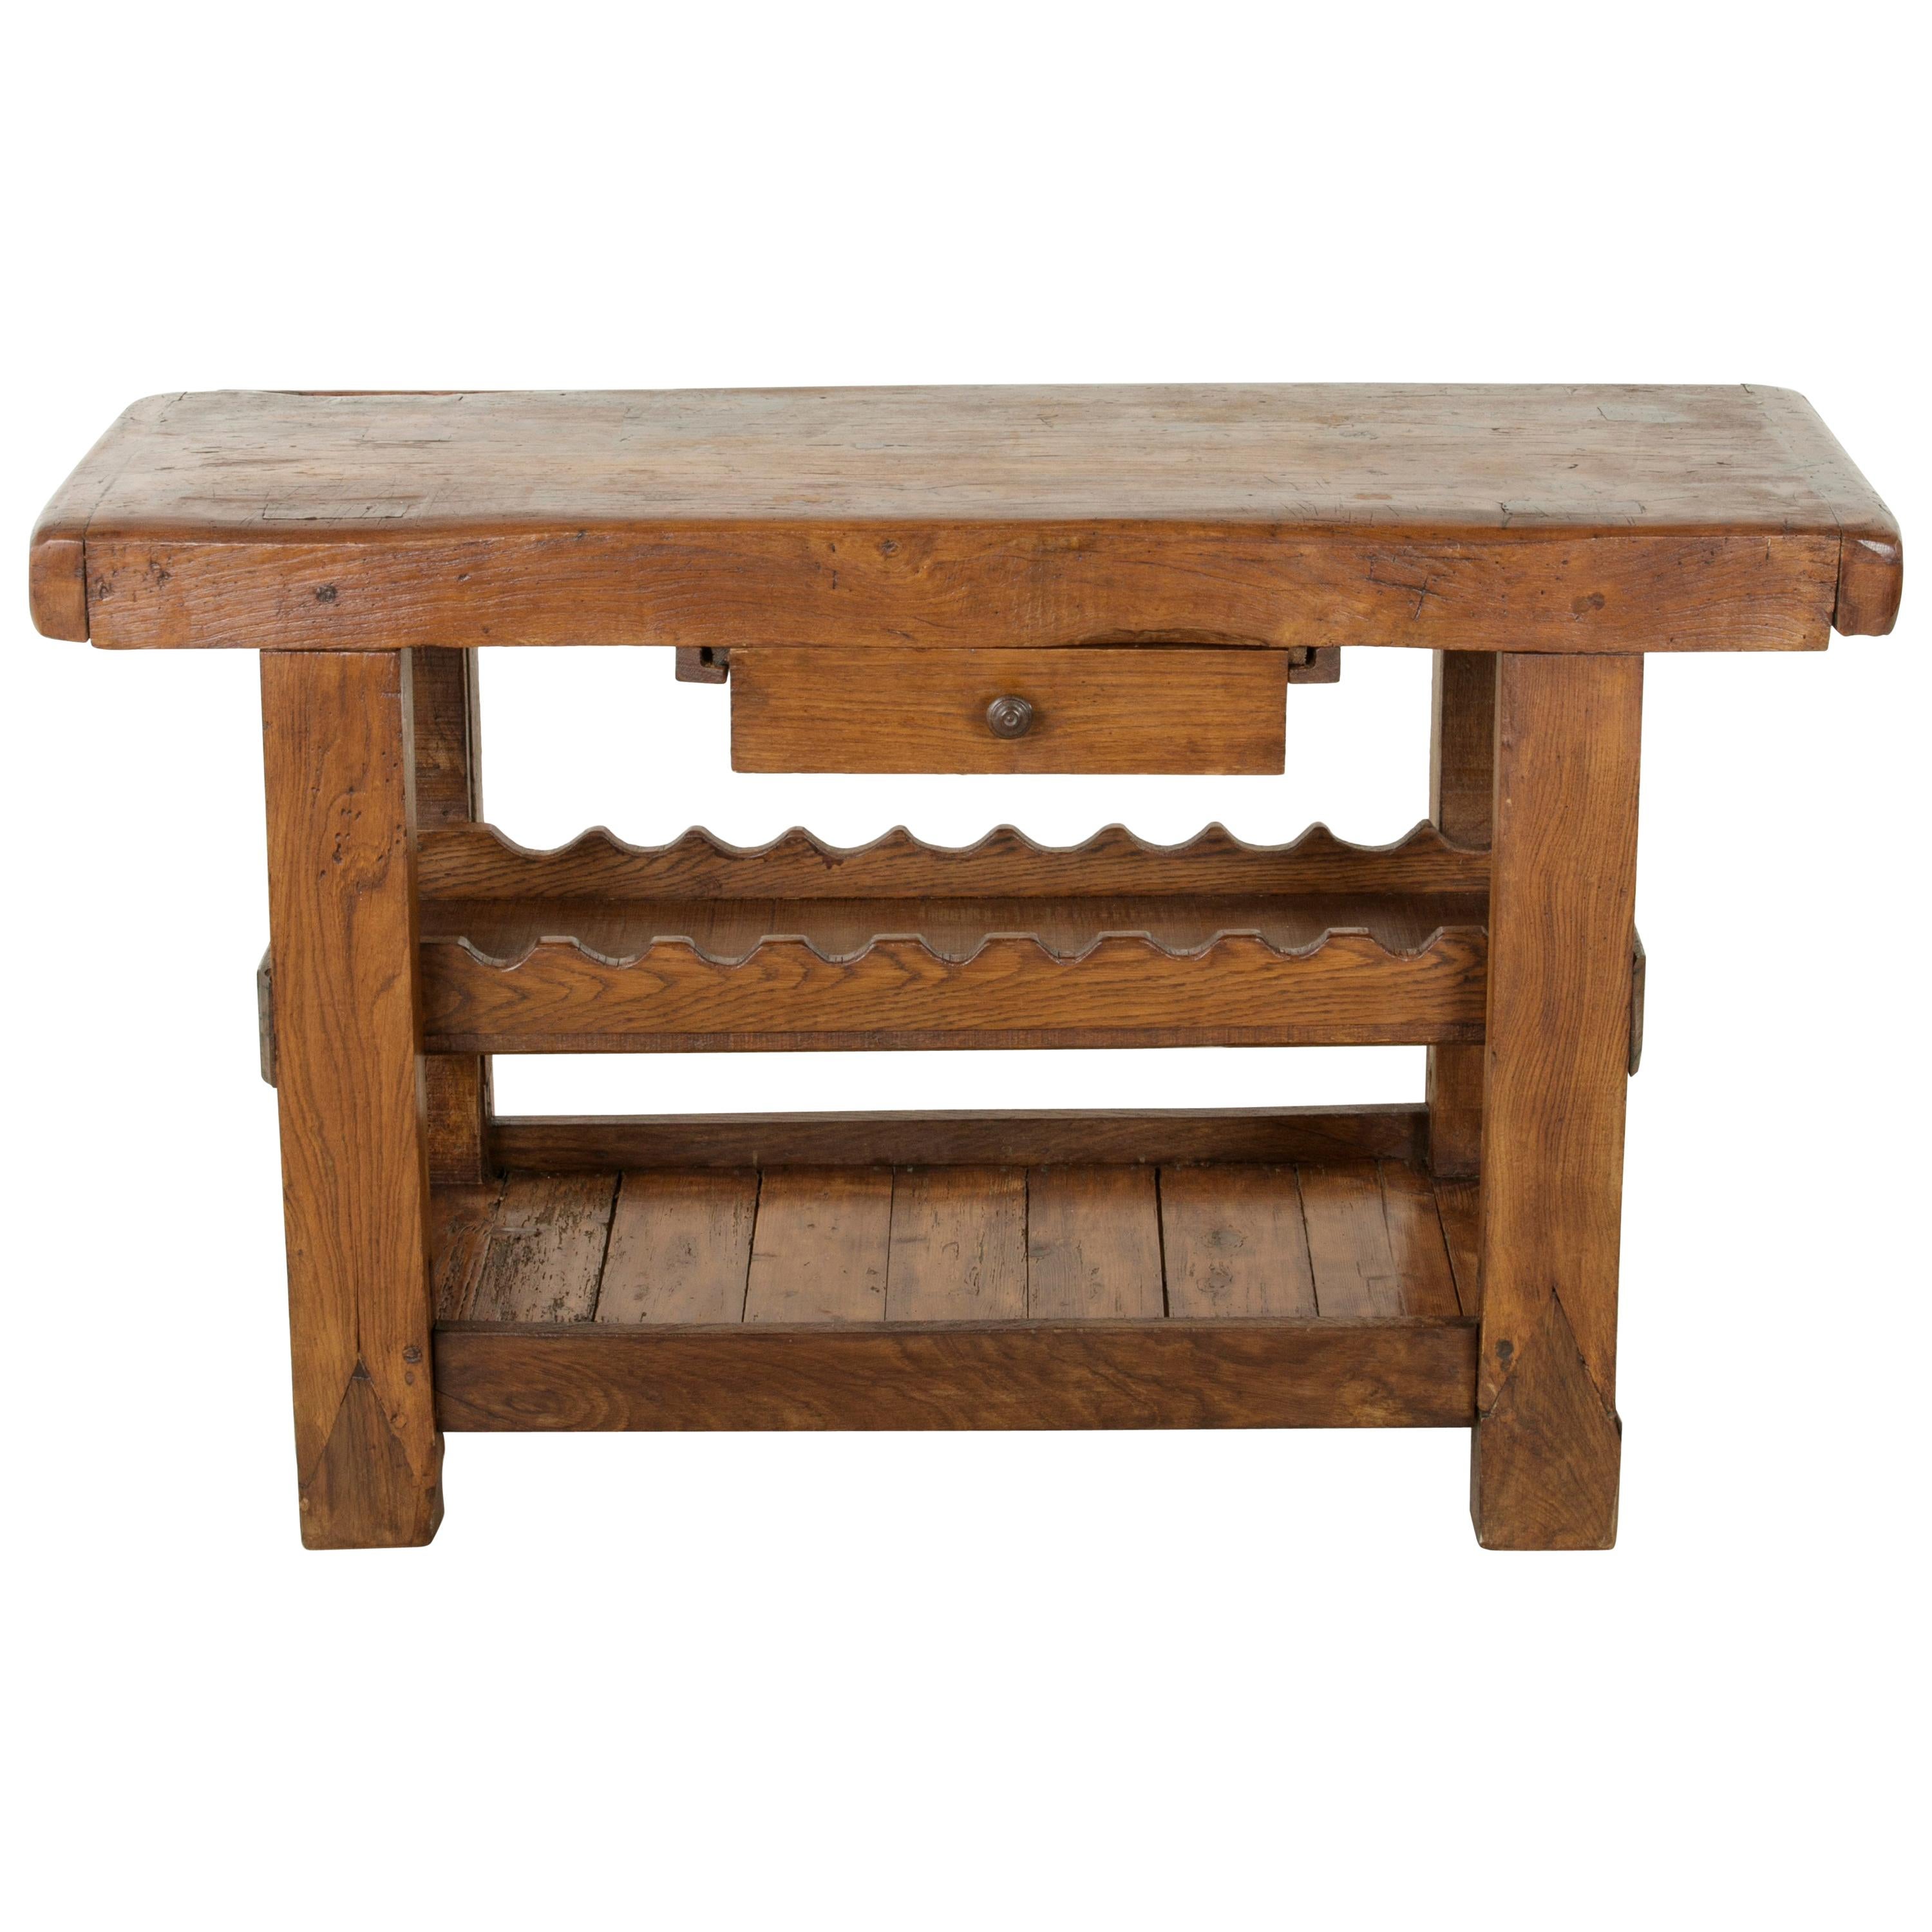 Late 19th Century French Oak Work Bench, Console Table, Sofa Table, or Dry Bar